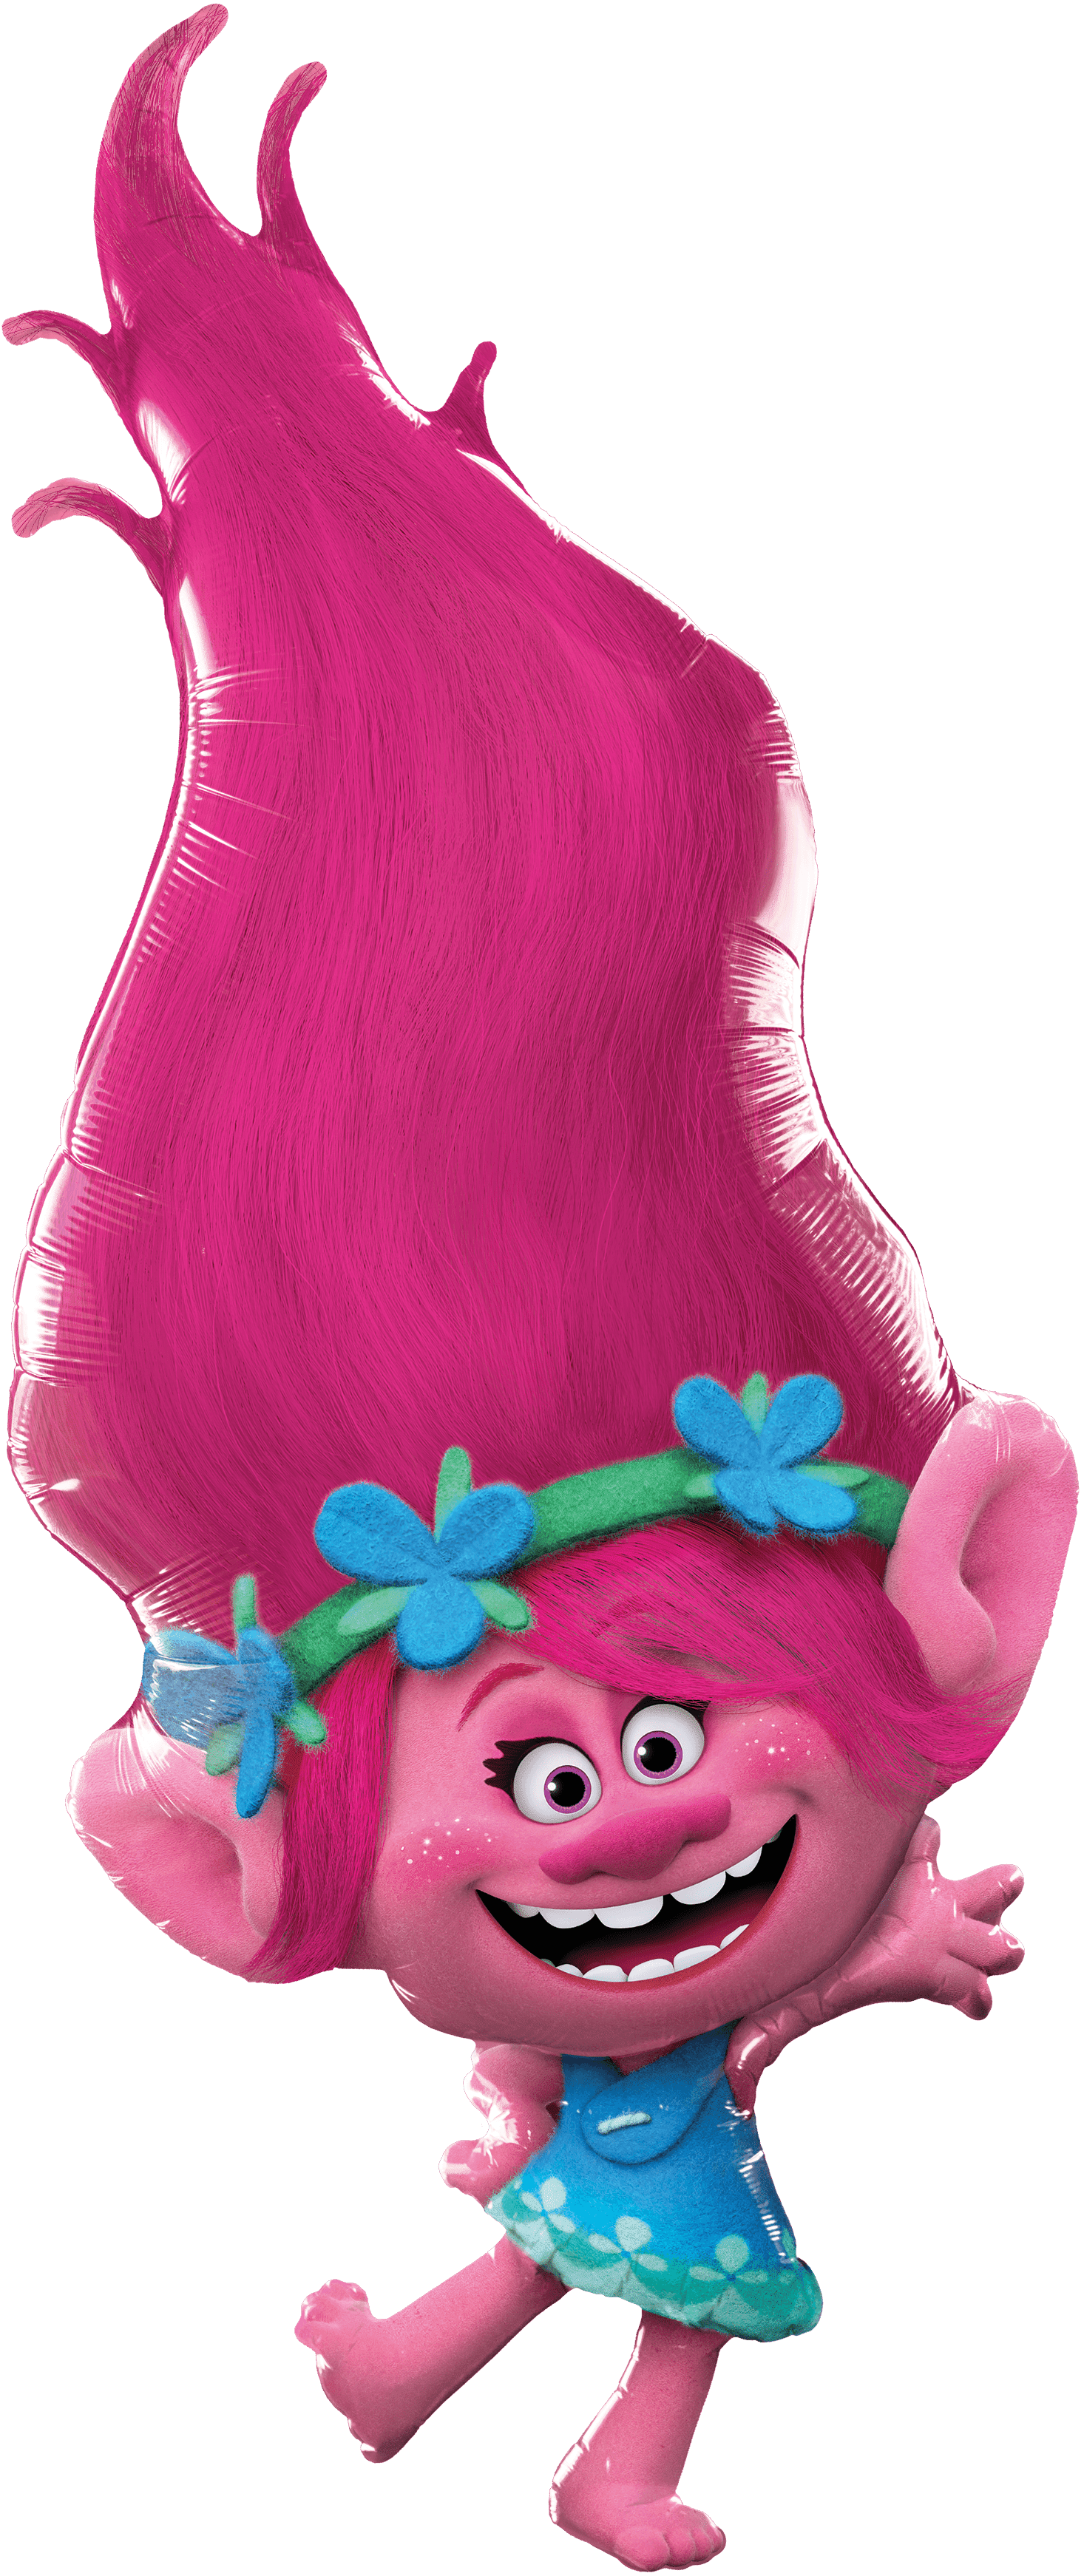 TROLLS POPPY PINK AND COOPER 18 INCH NECKLACE 5 TO 7 GIFT BOX BIRTHDAY PARTY 